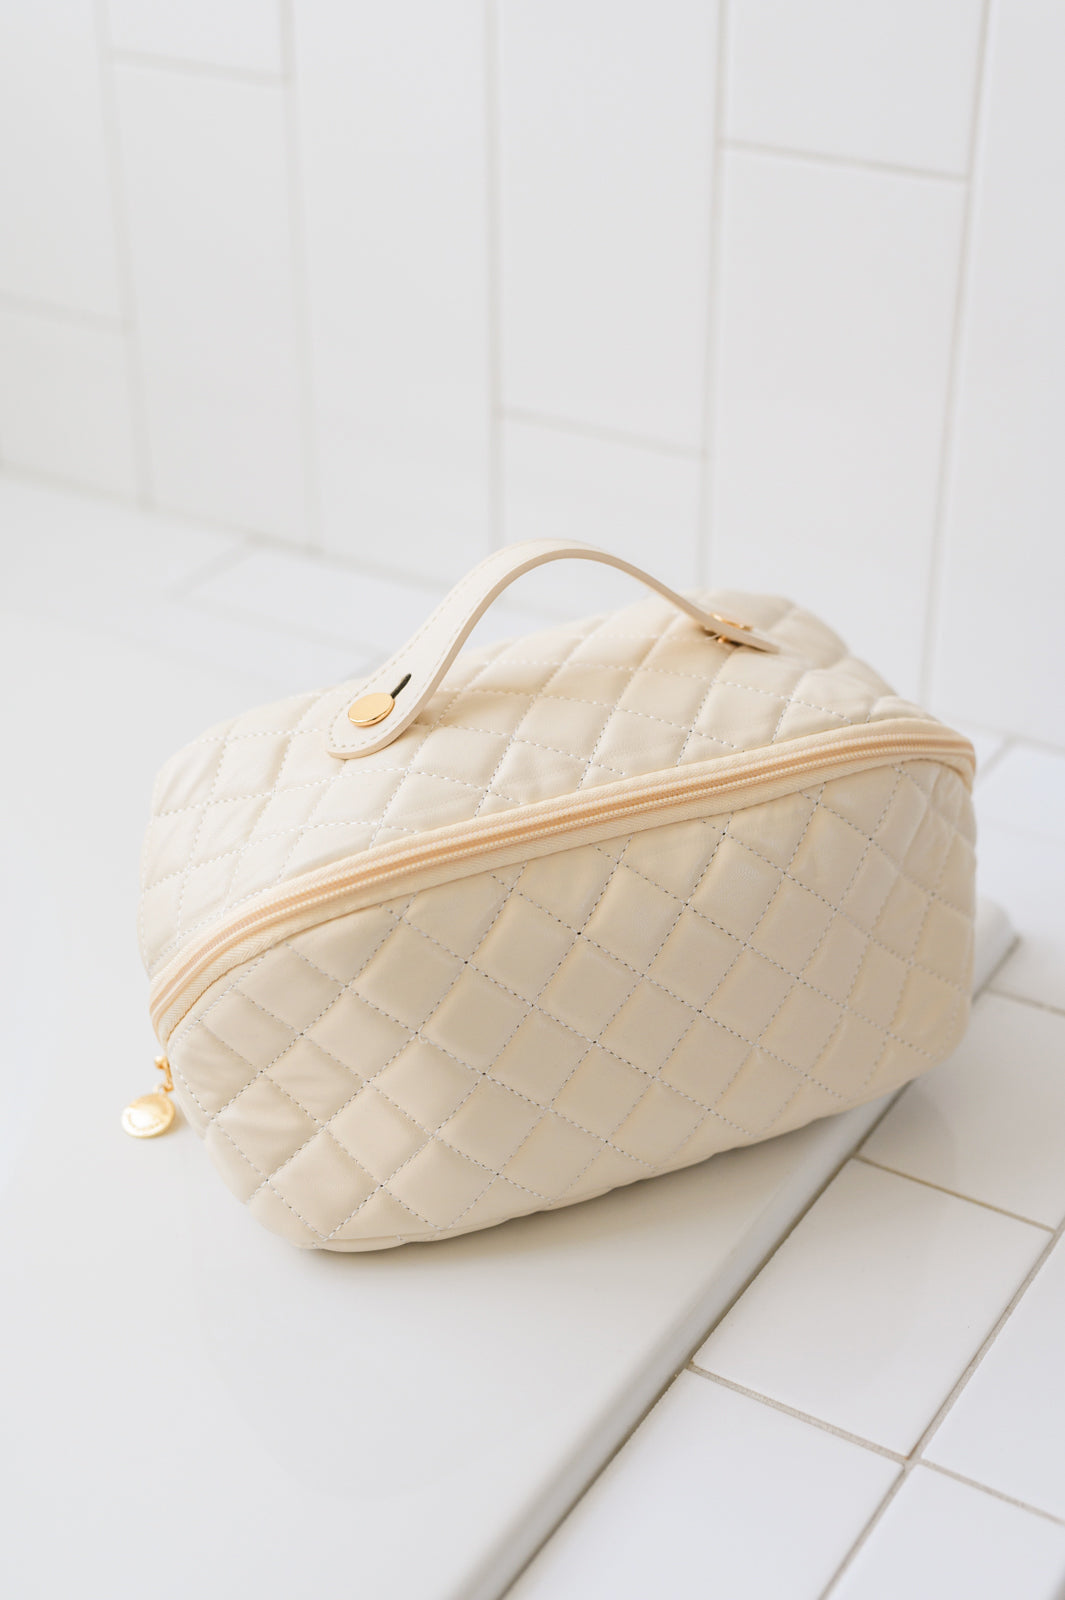 Large Capacity Quilted Makeup Bag in Cream-220 Beauty/Gift-Inspired by Justeen-Women's Clothing Boutique in Chicago, Illinois